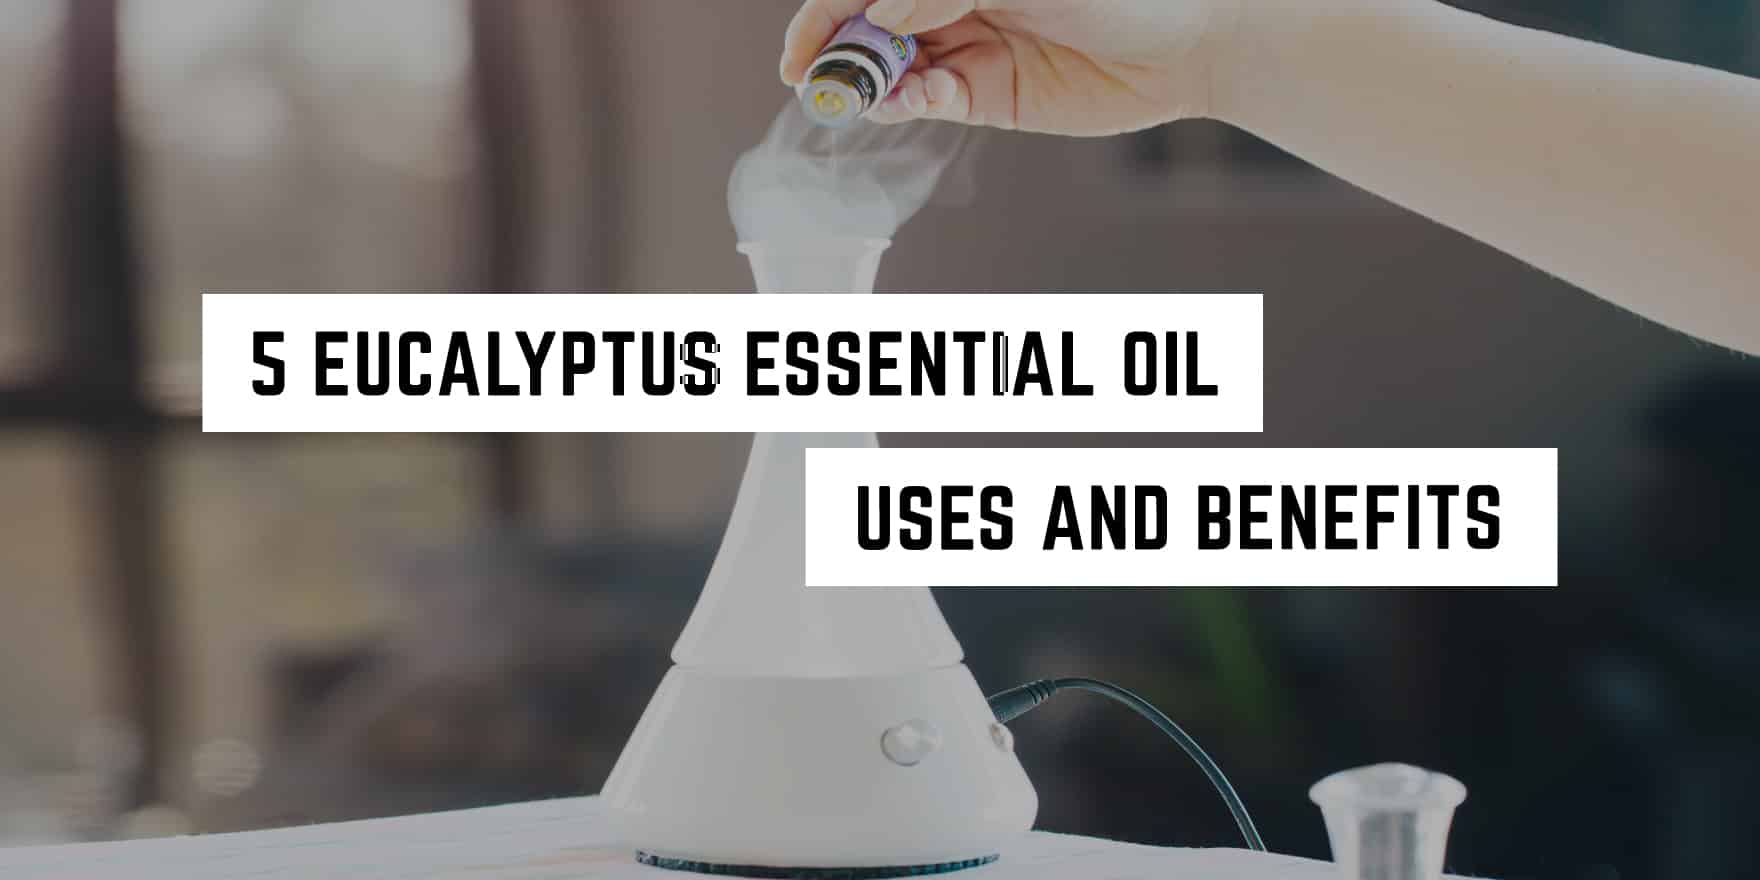 5 Eucalyptus Essential Oil Uses and Benefits